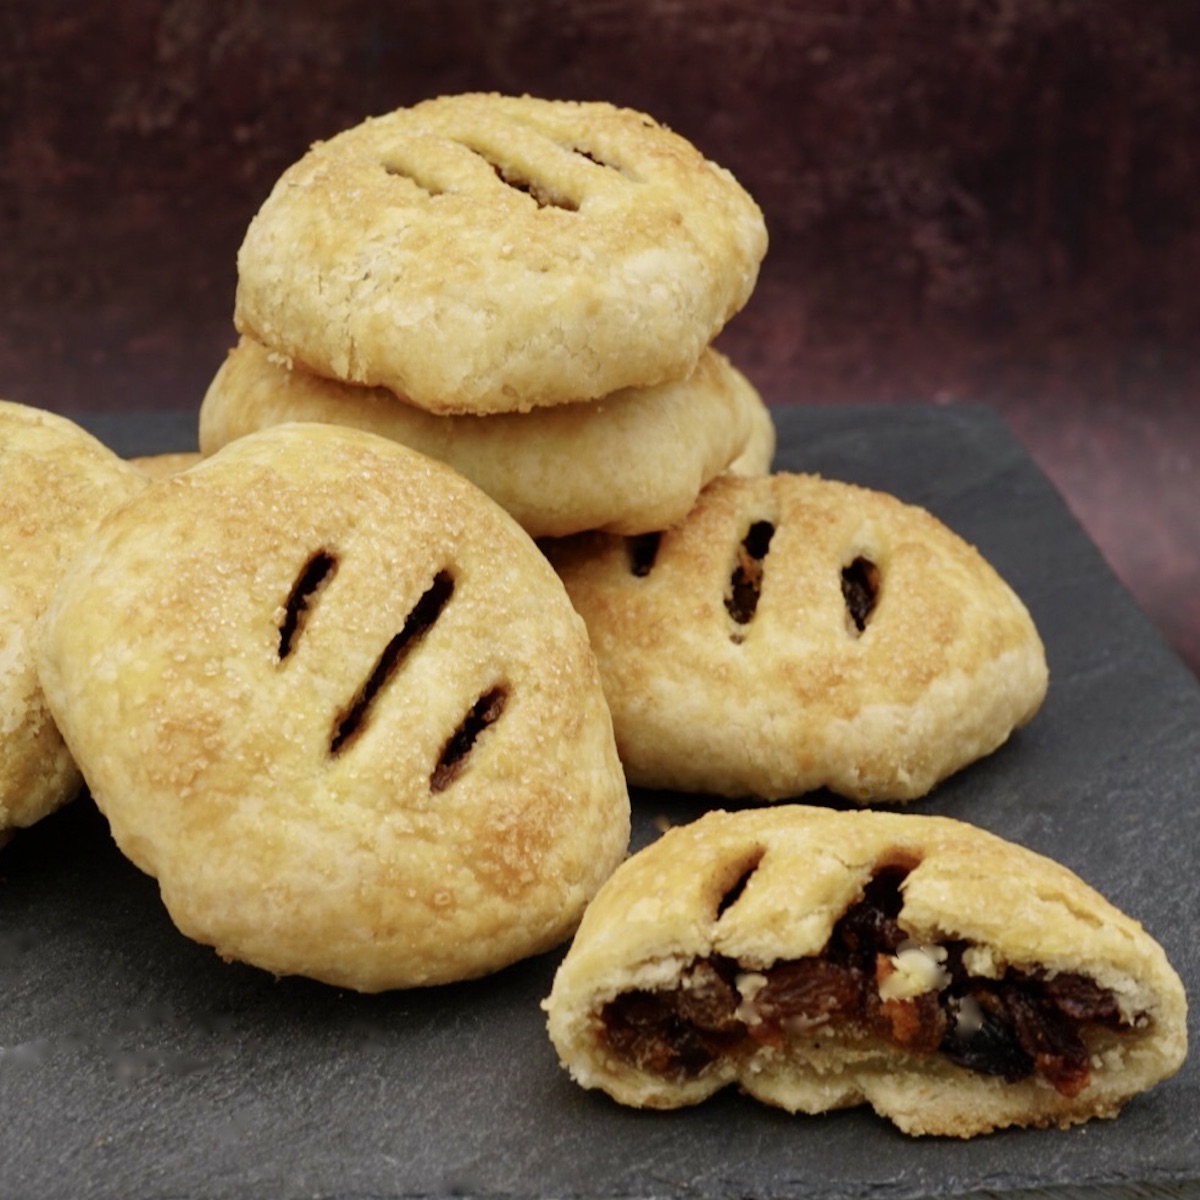 A stack of Eccles cakes